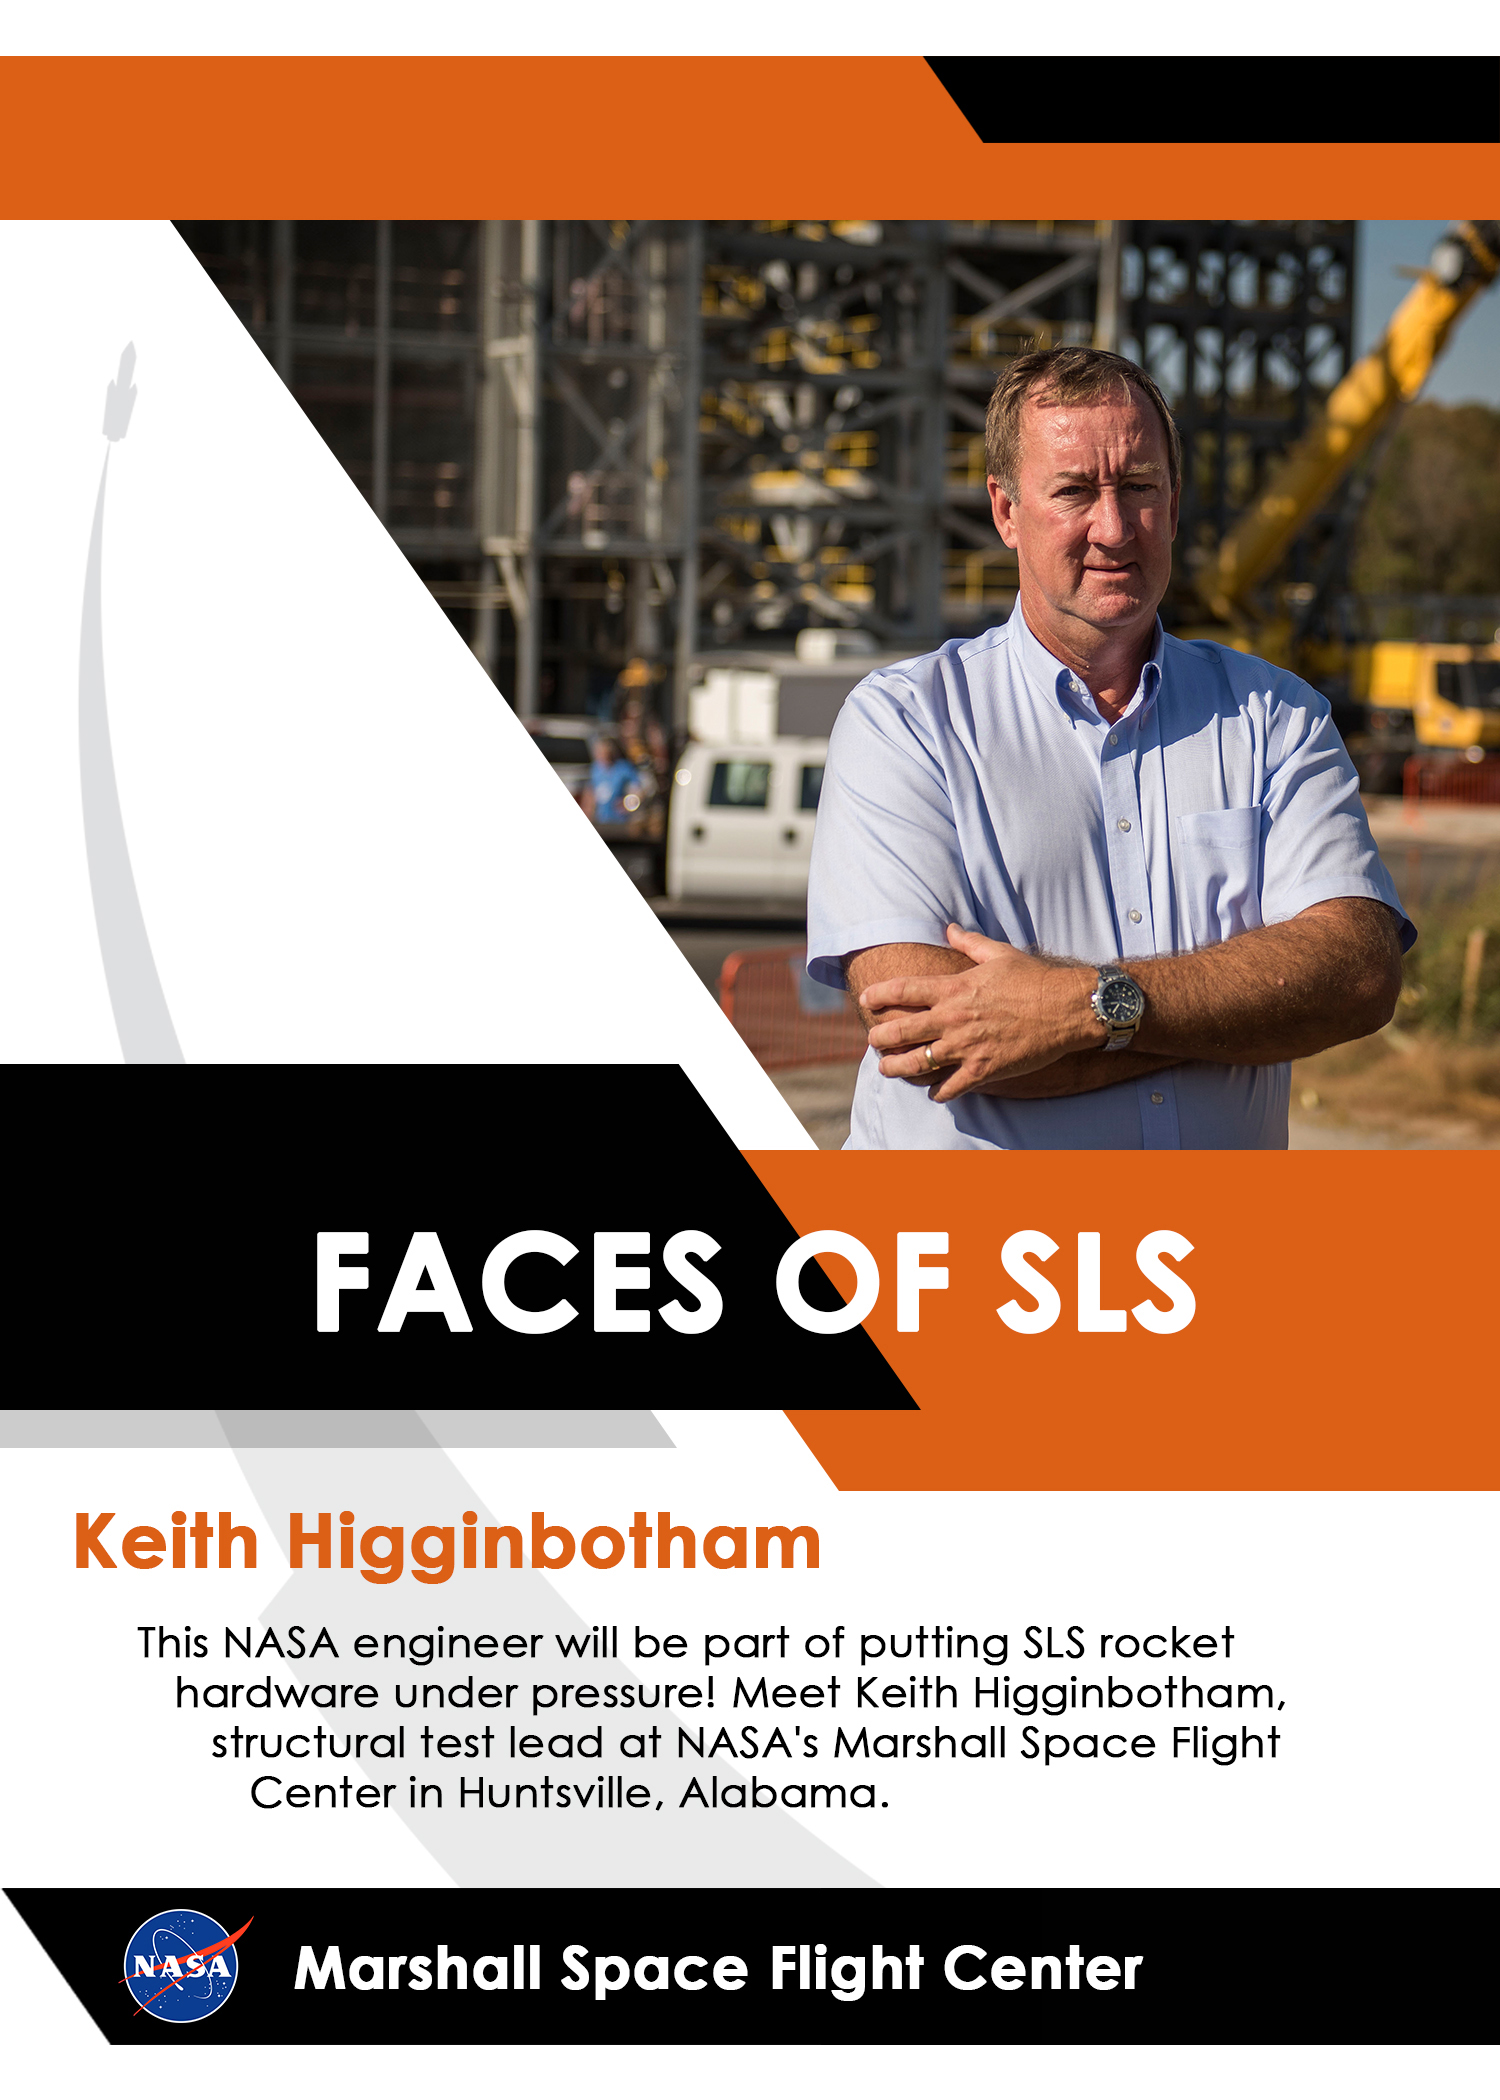 Keith Higginbotham for Face of SLS